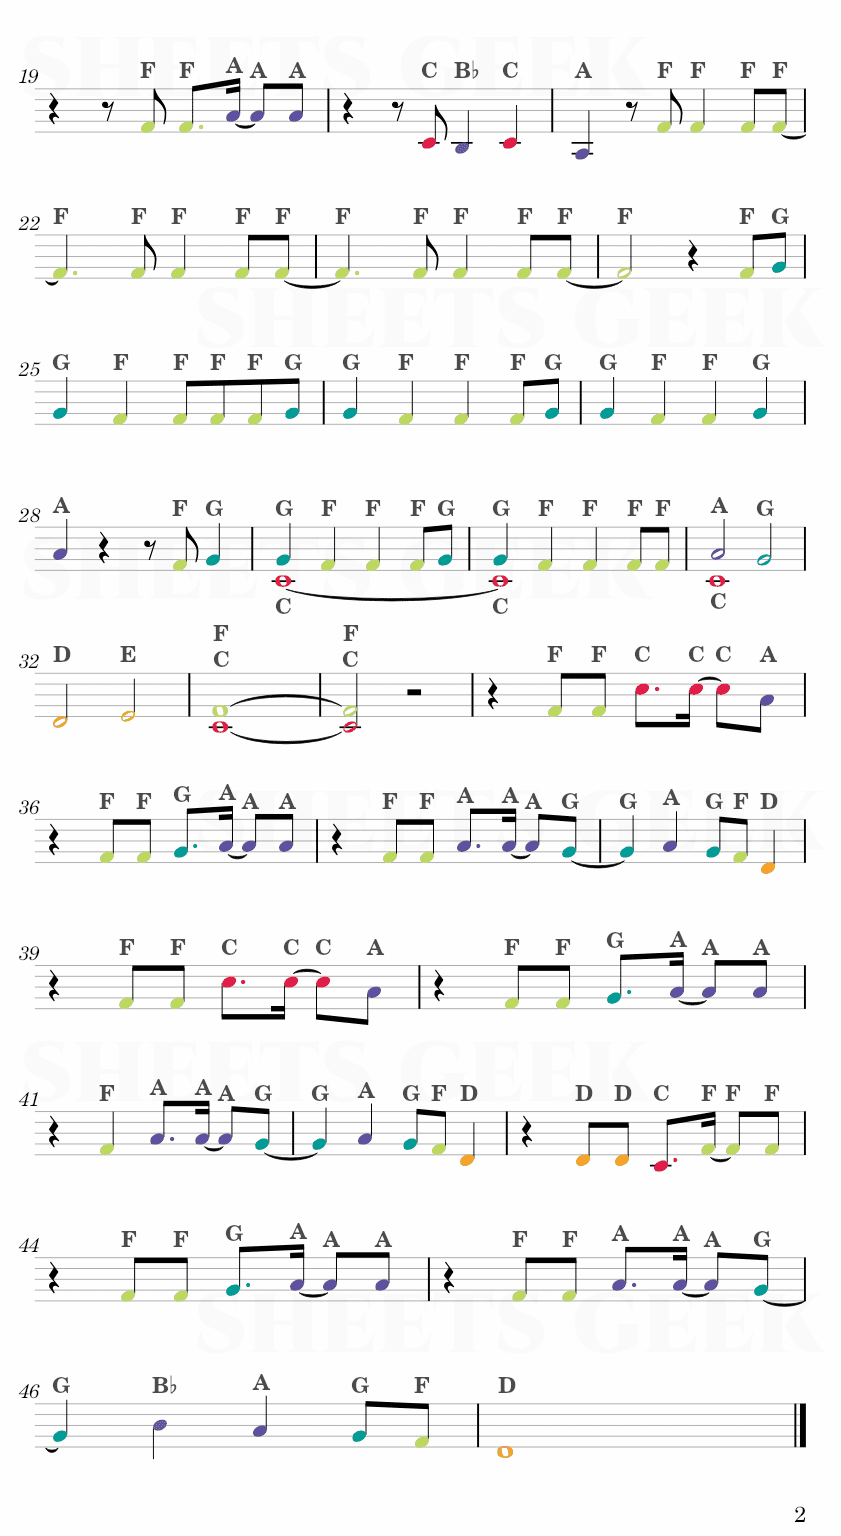 Heart Of Stone - Six: The Musical Easy Sheet Music Free for piano, keyboard, flute, violin, sax, cello page 2